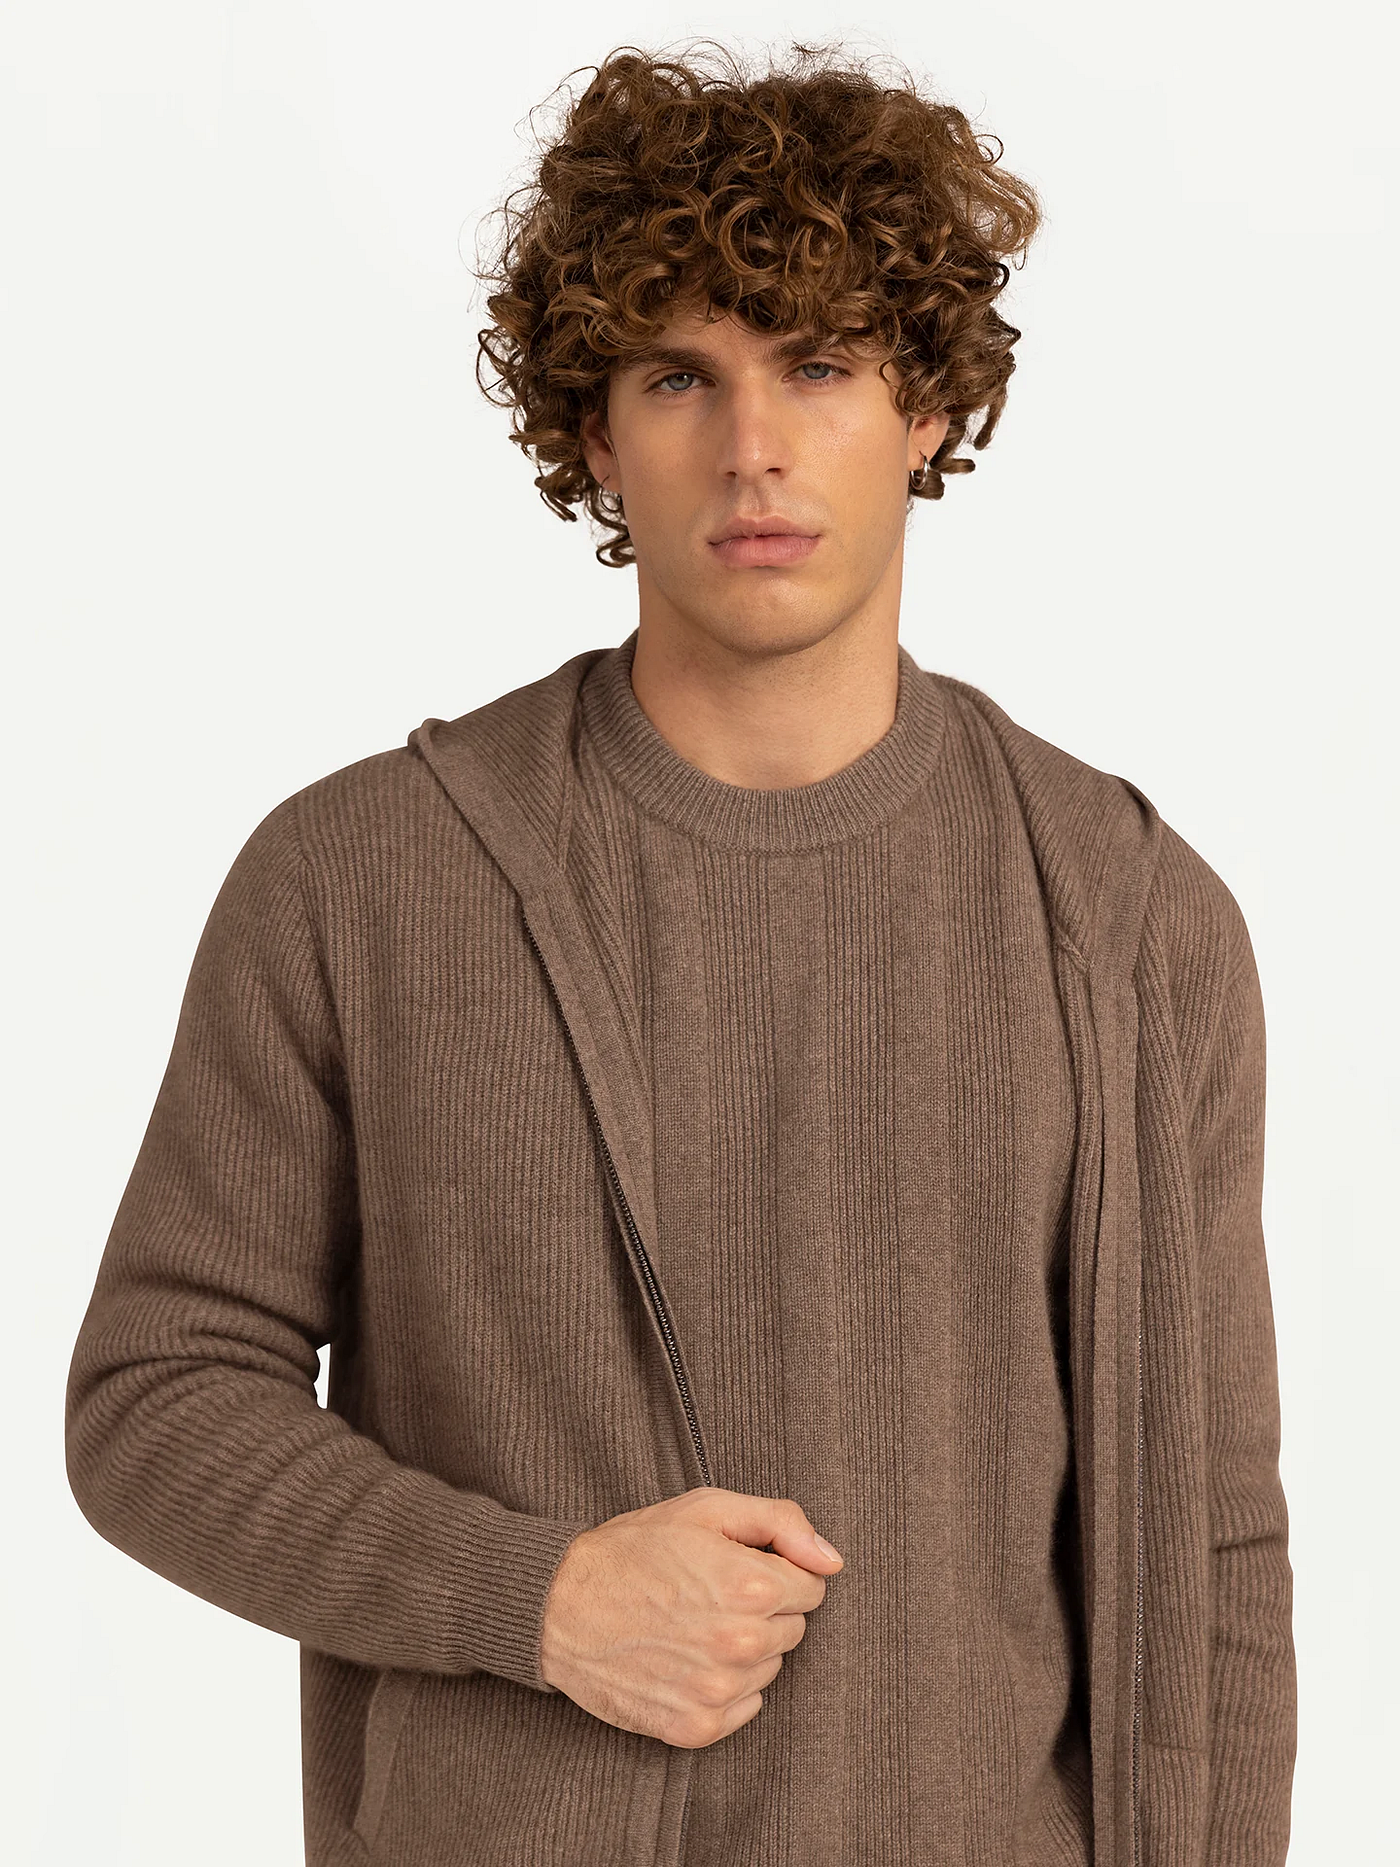 Cashmere Men's Hoodies: The Ultimate Blend of Luxury and Comfort, by  Sophiejohn